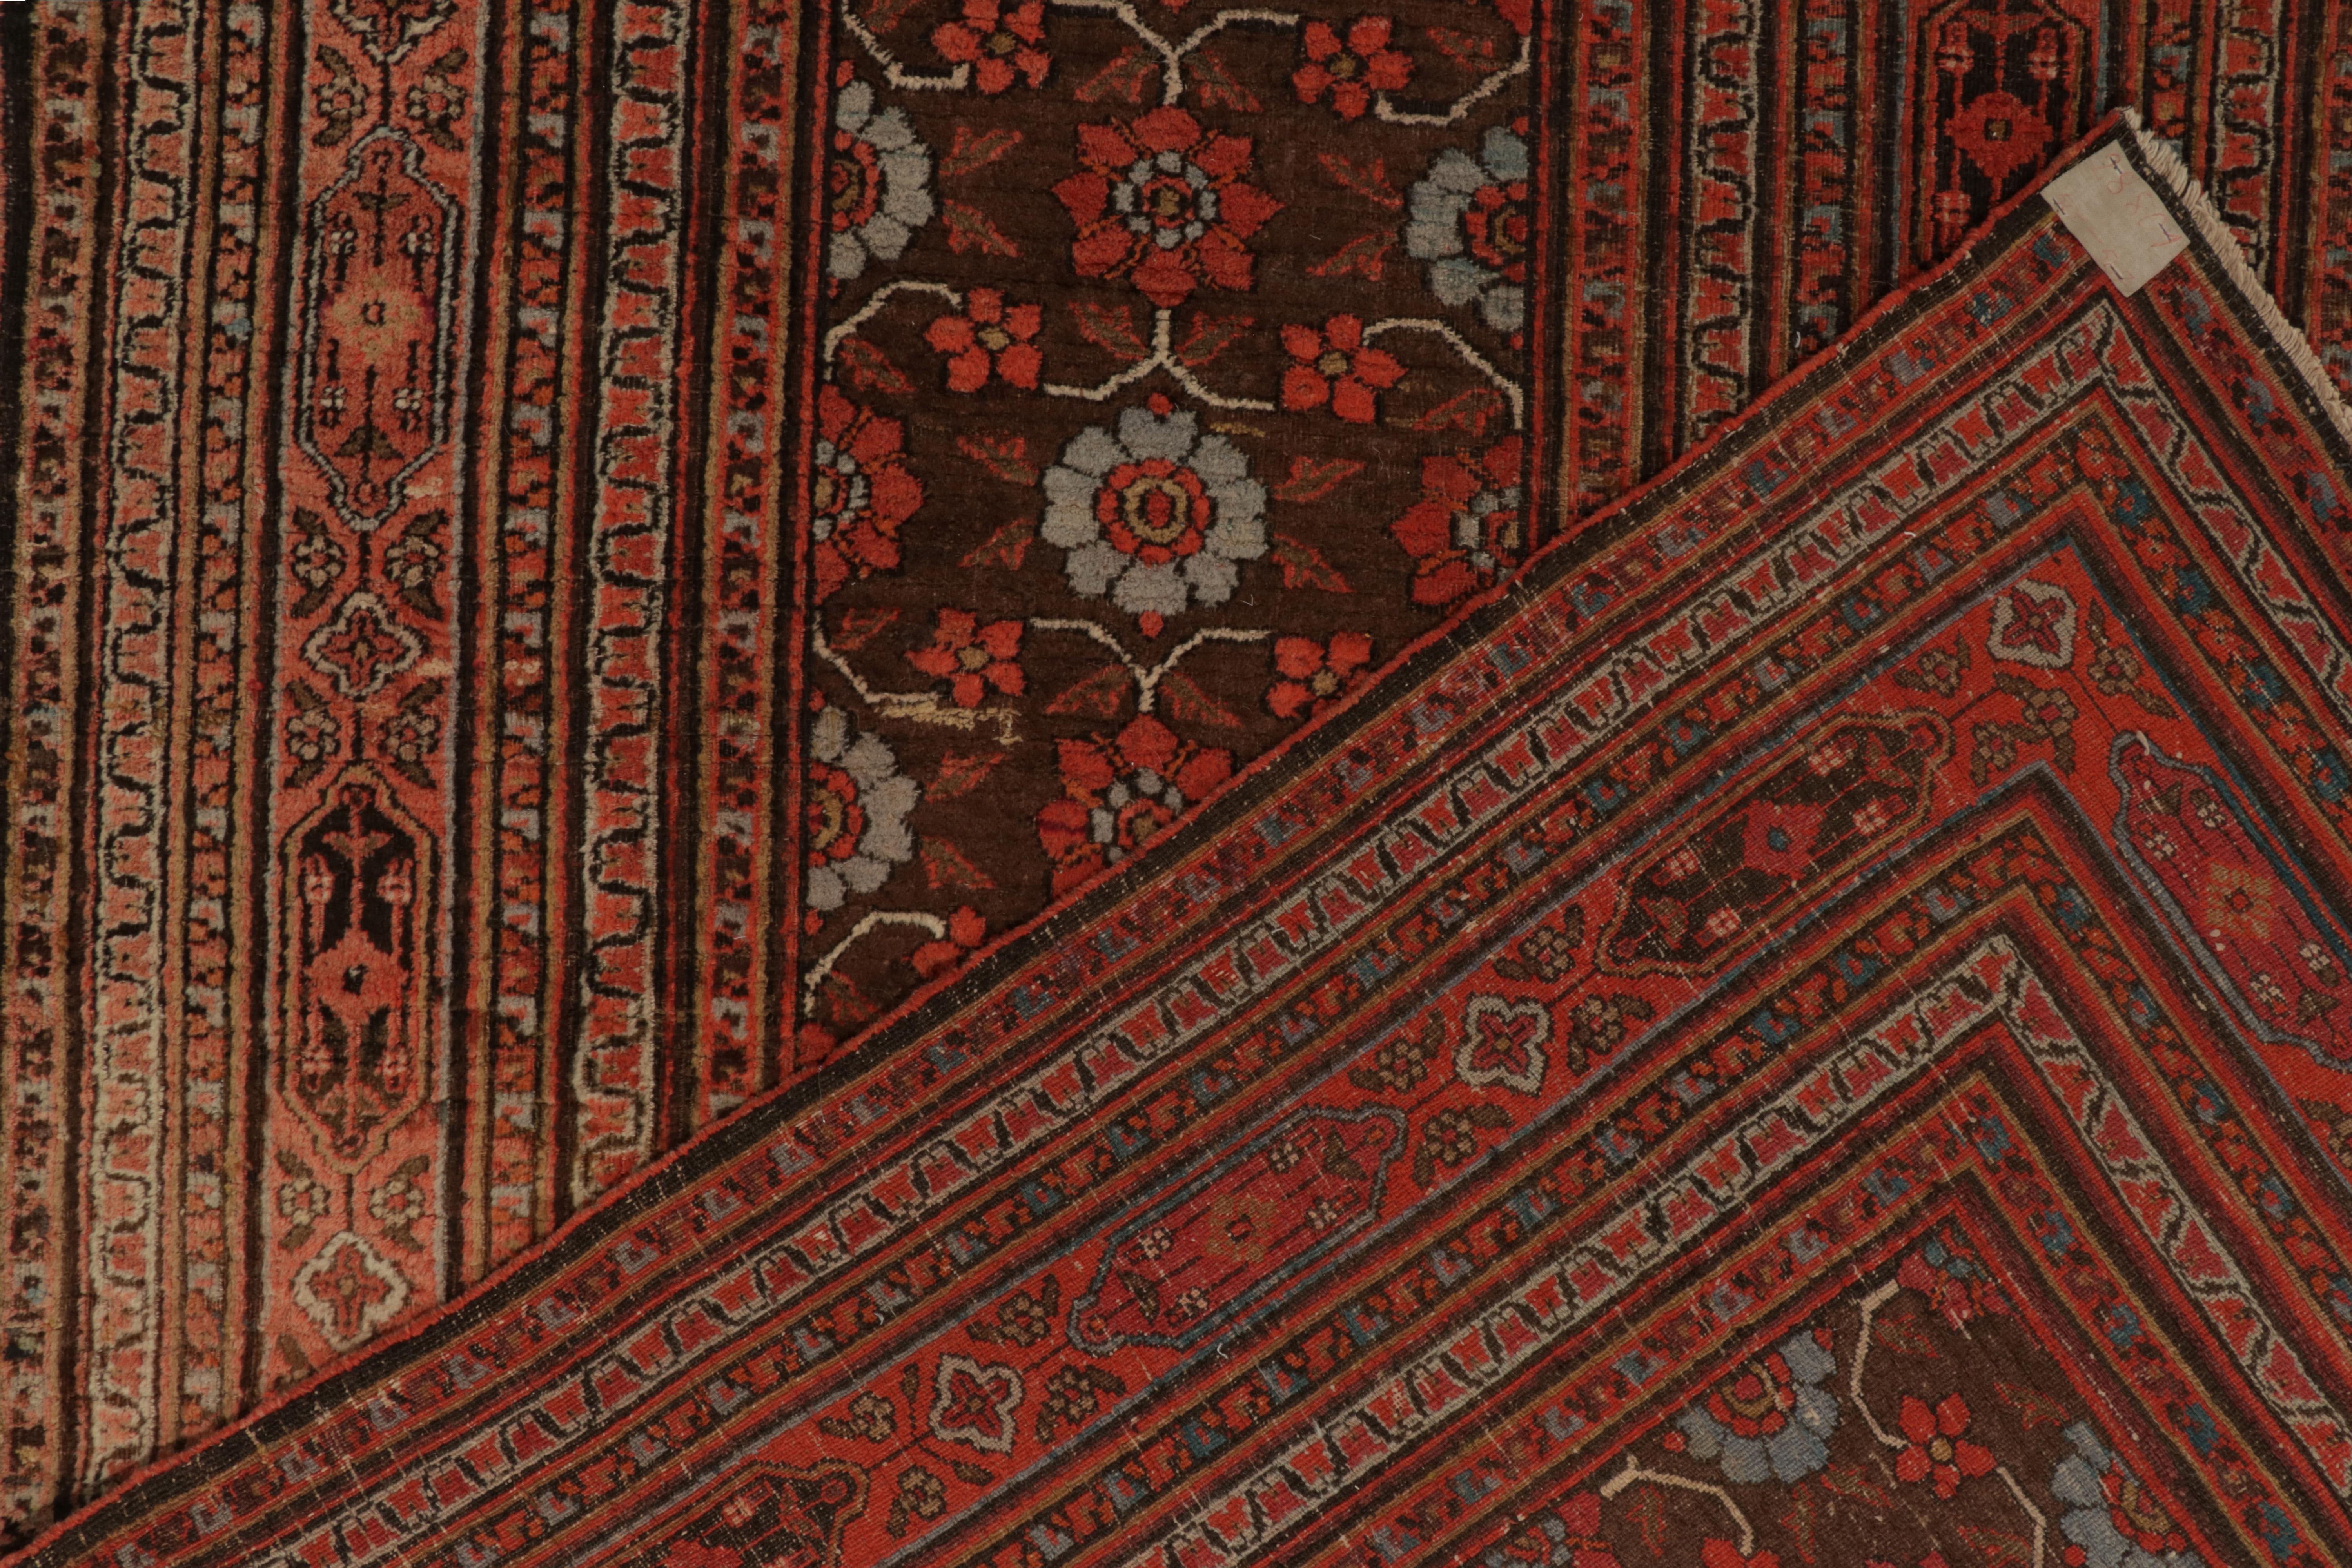 Late 19th Century Antique Doroksh Rug in Red Brown & Blue Herati Floral Pattern by Rug Kilim For Sale